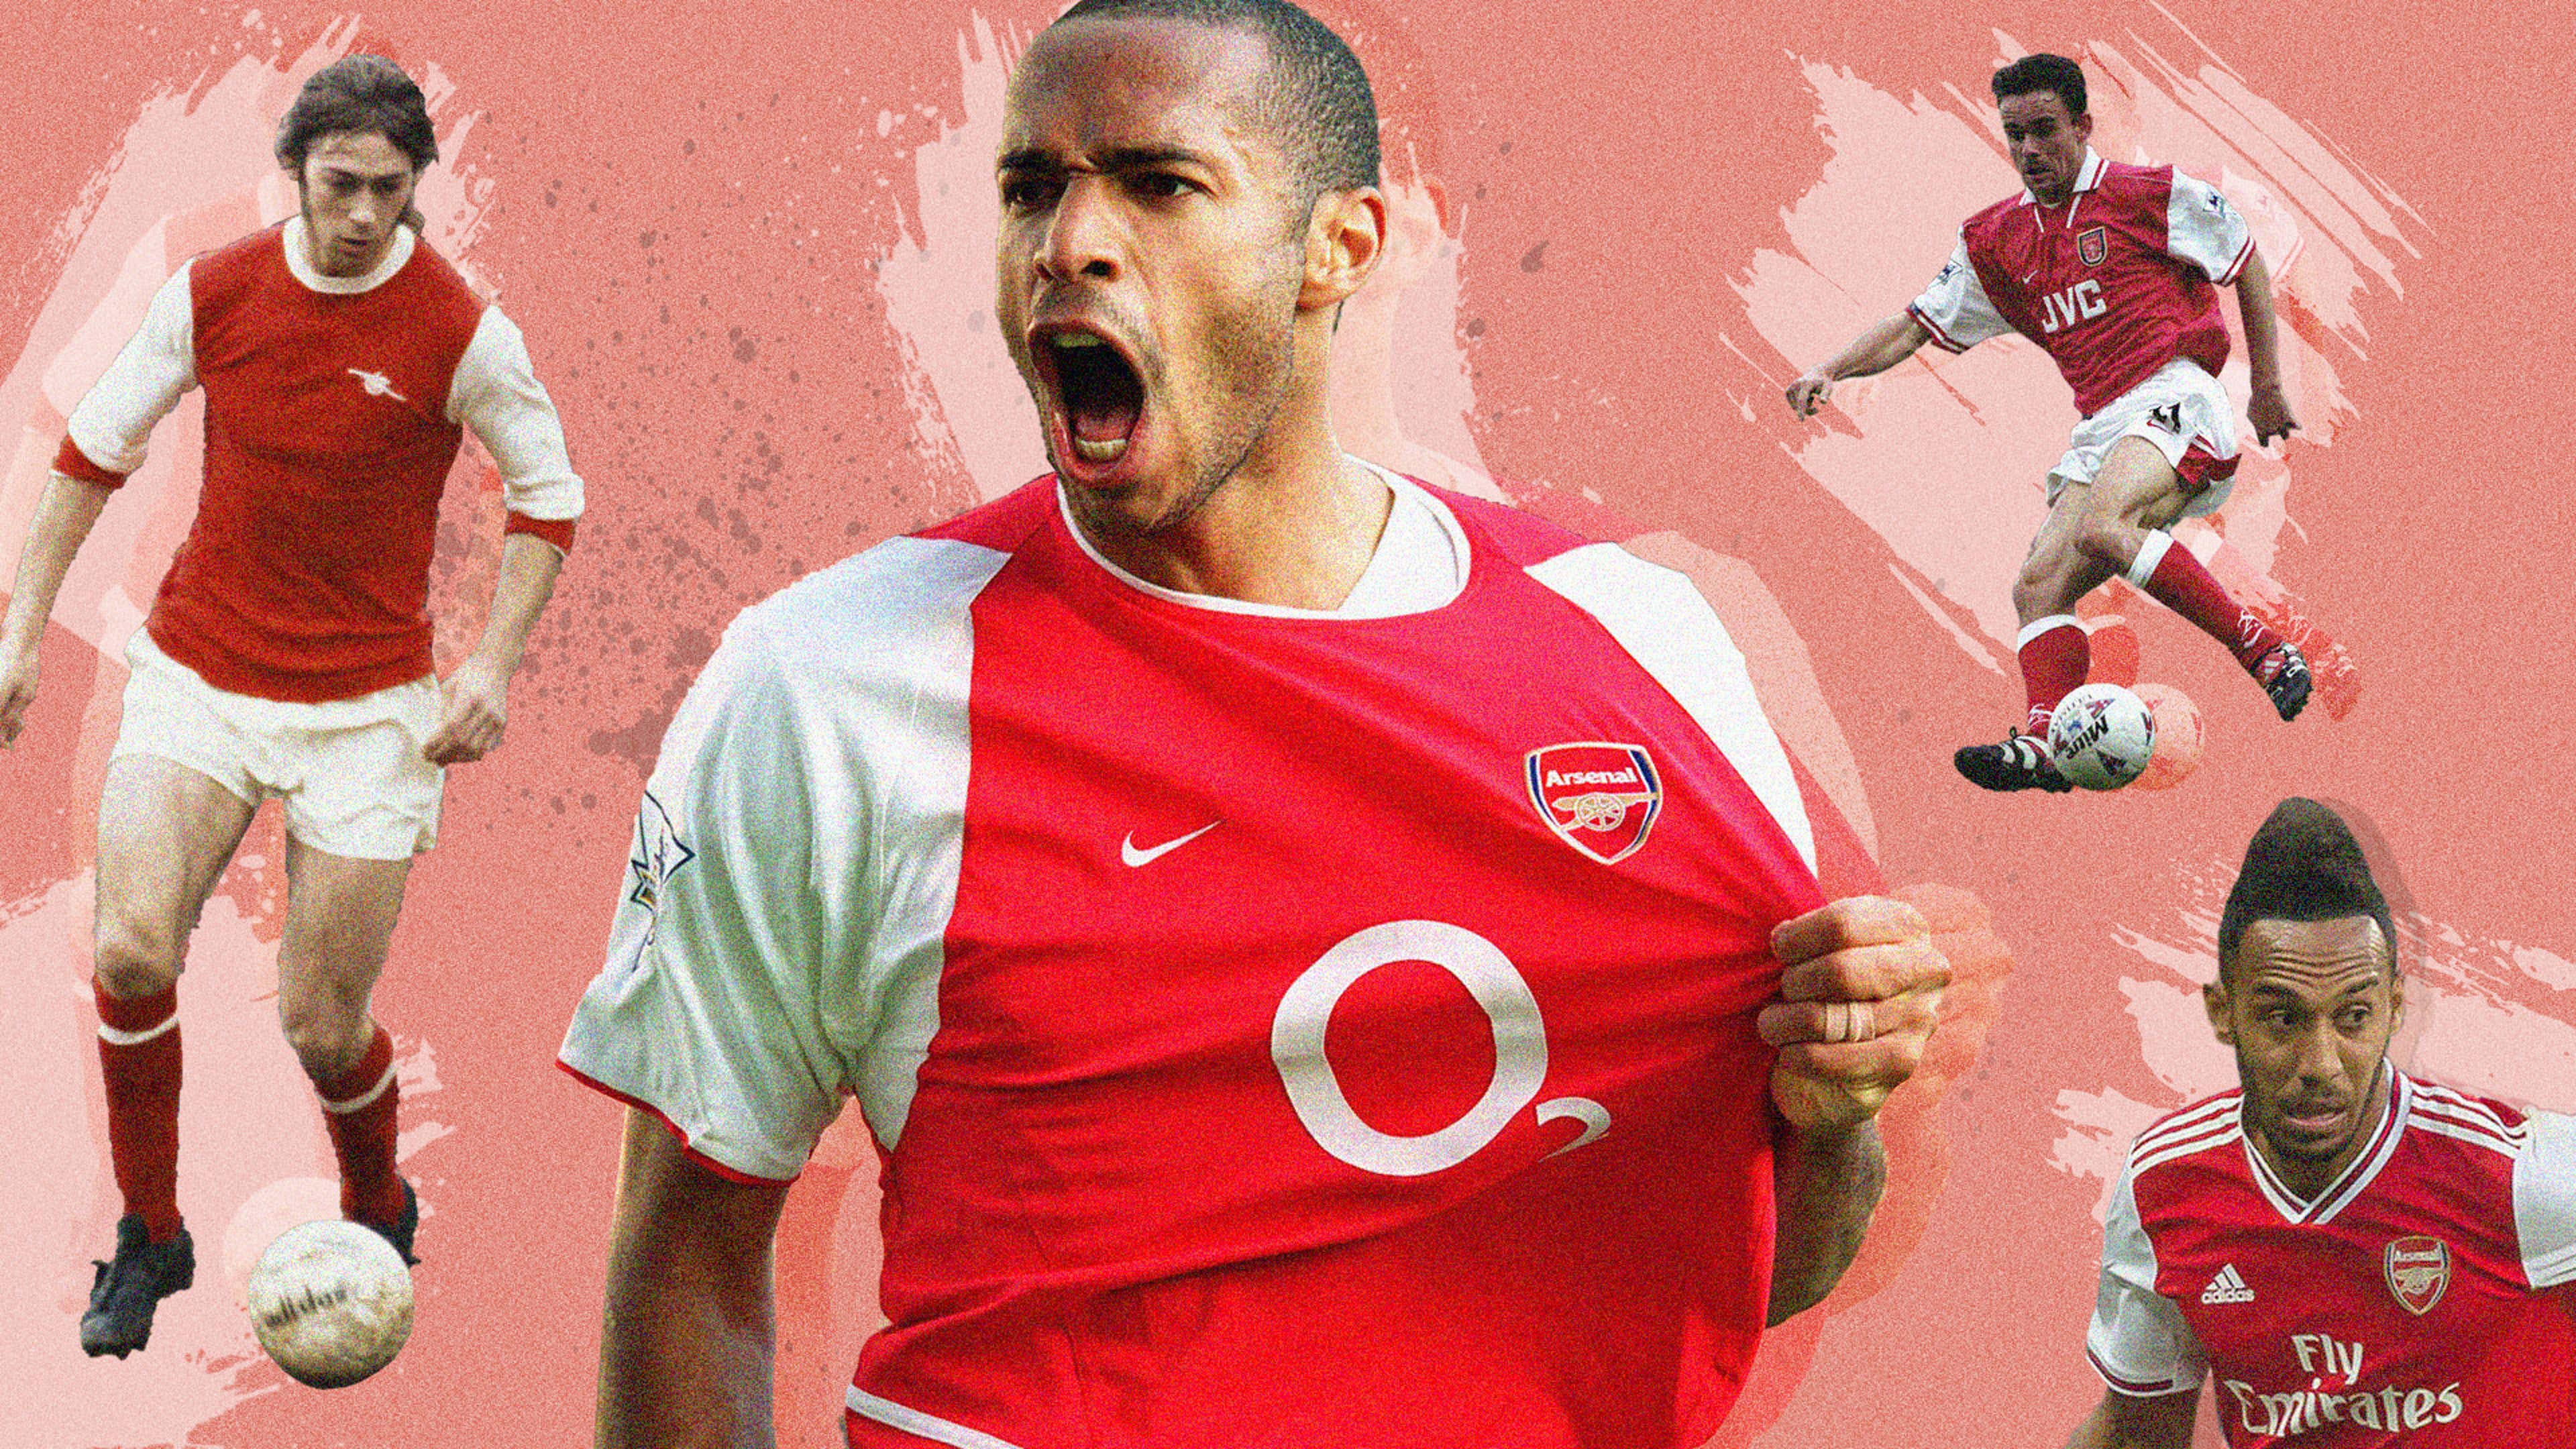 Arsenal's top 10 home kits of all time - ranked